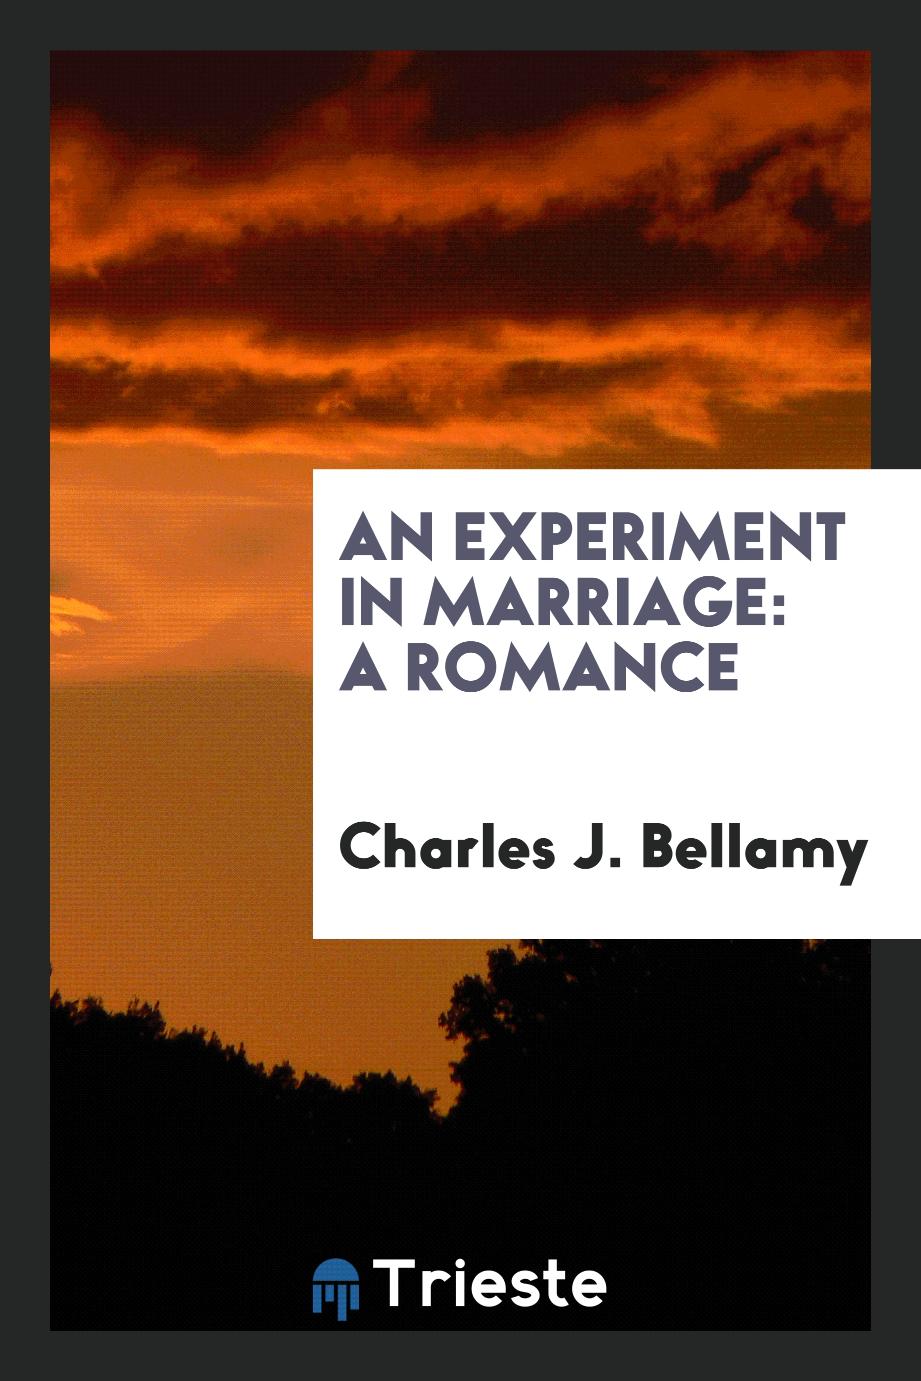 An experiment in marriage: a romance